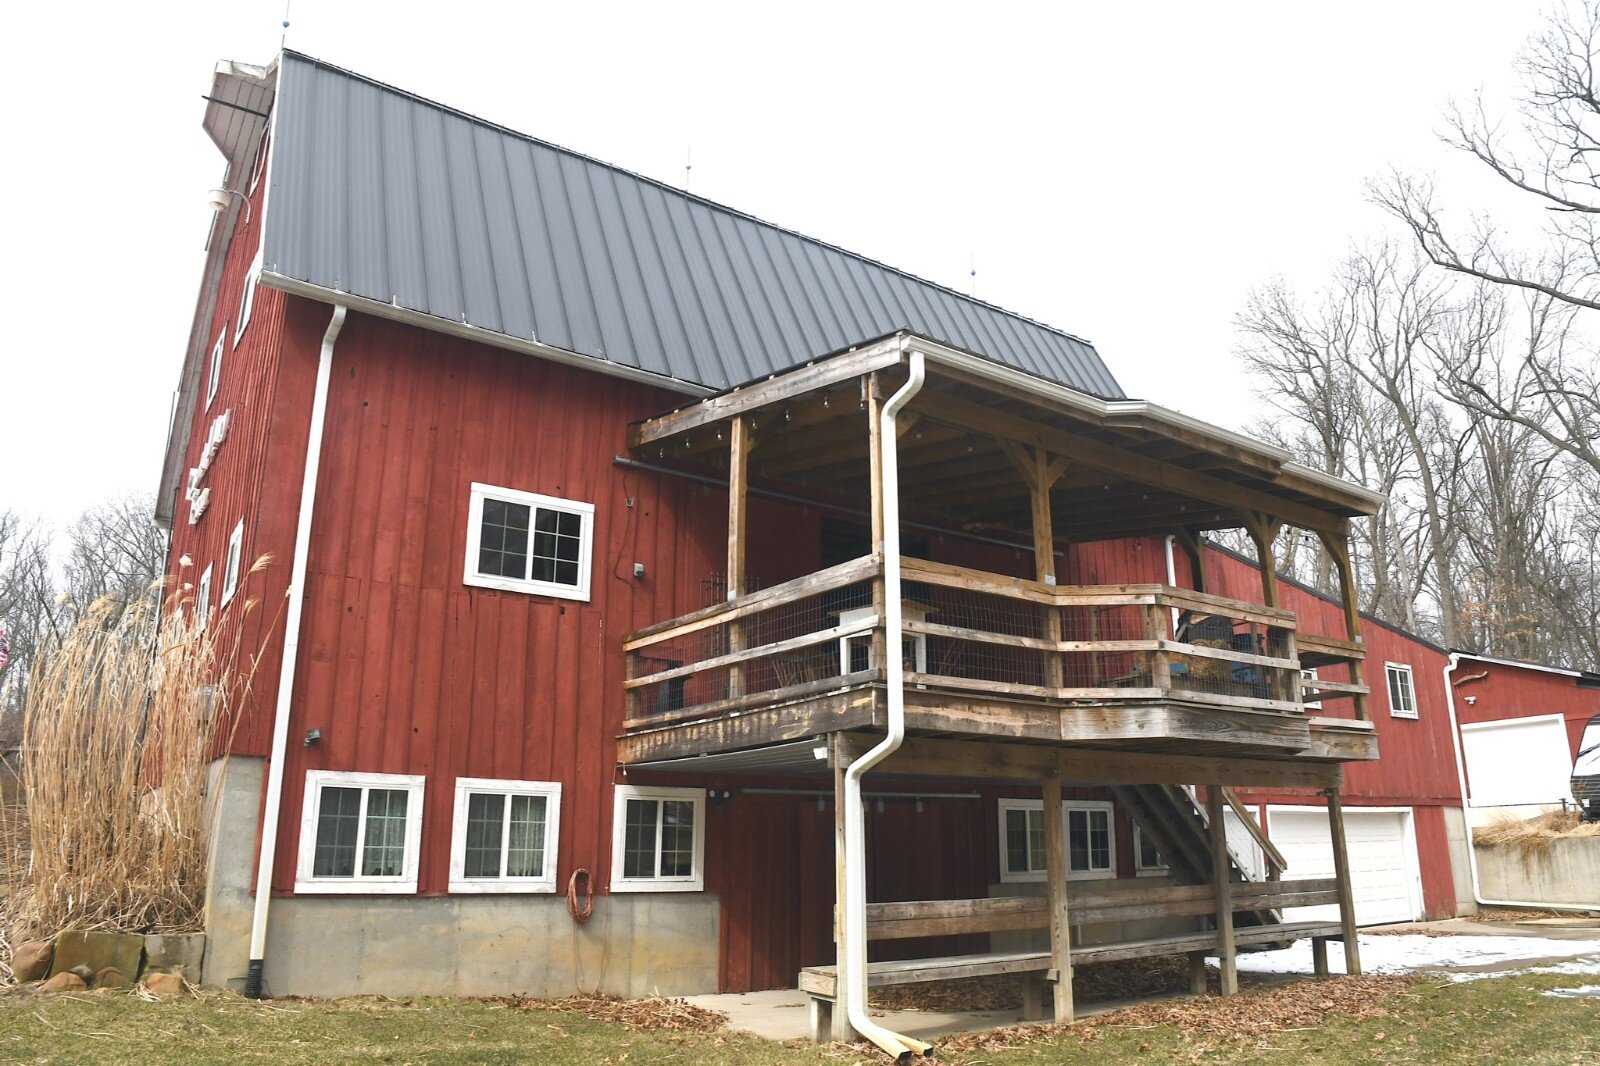 A view of the exterior of the barn that A. J. Jones moved several years ago.